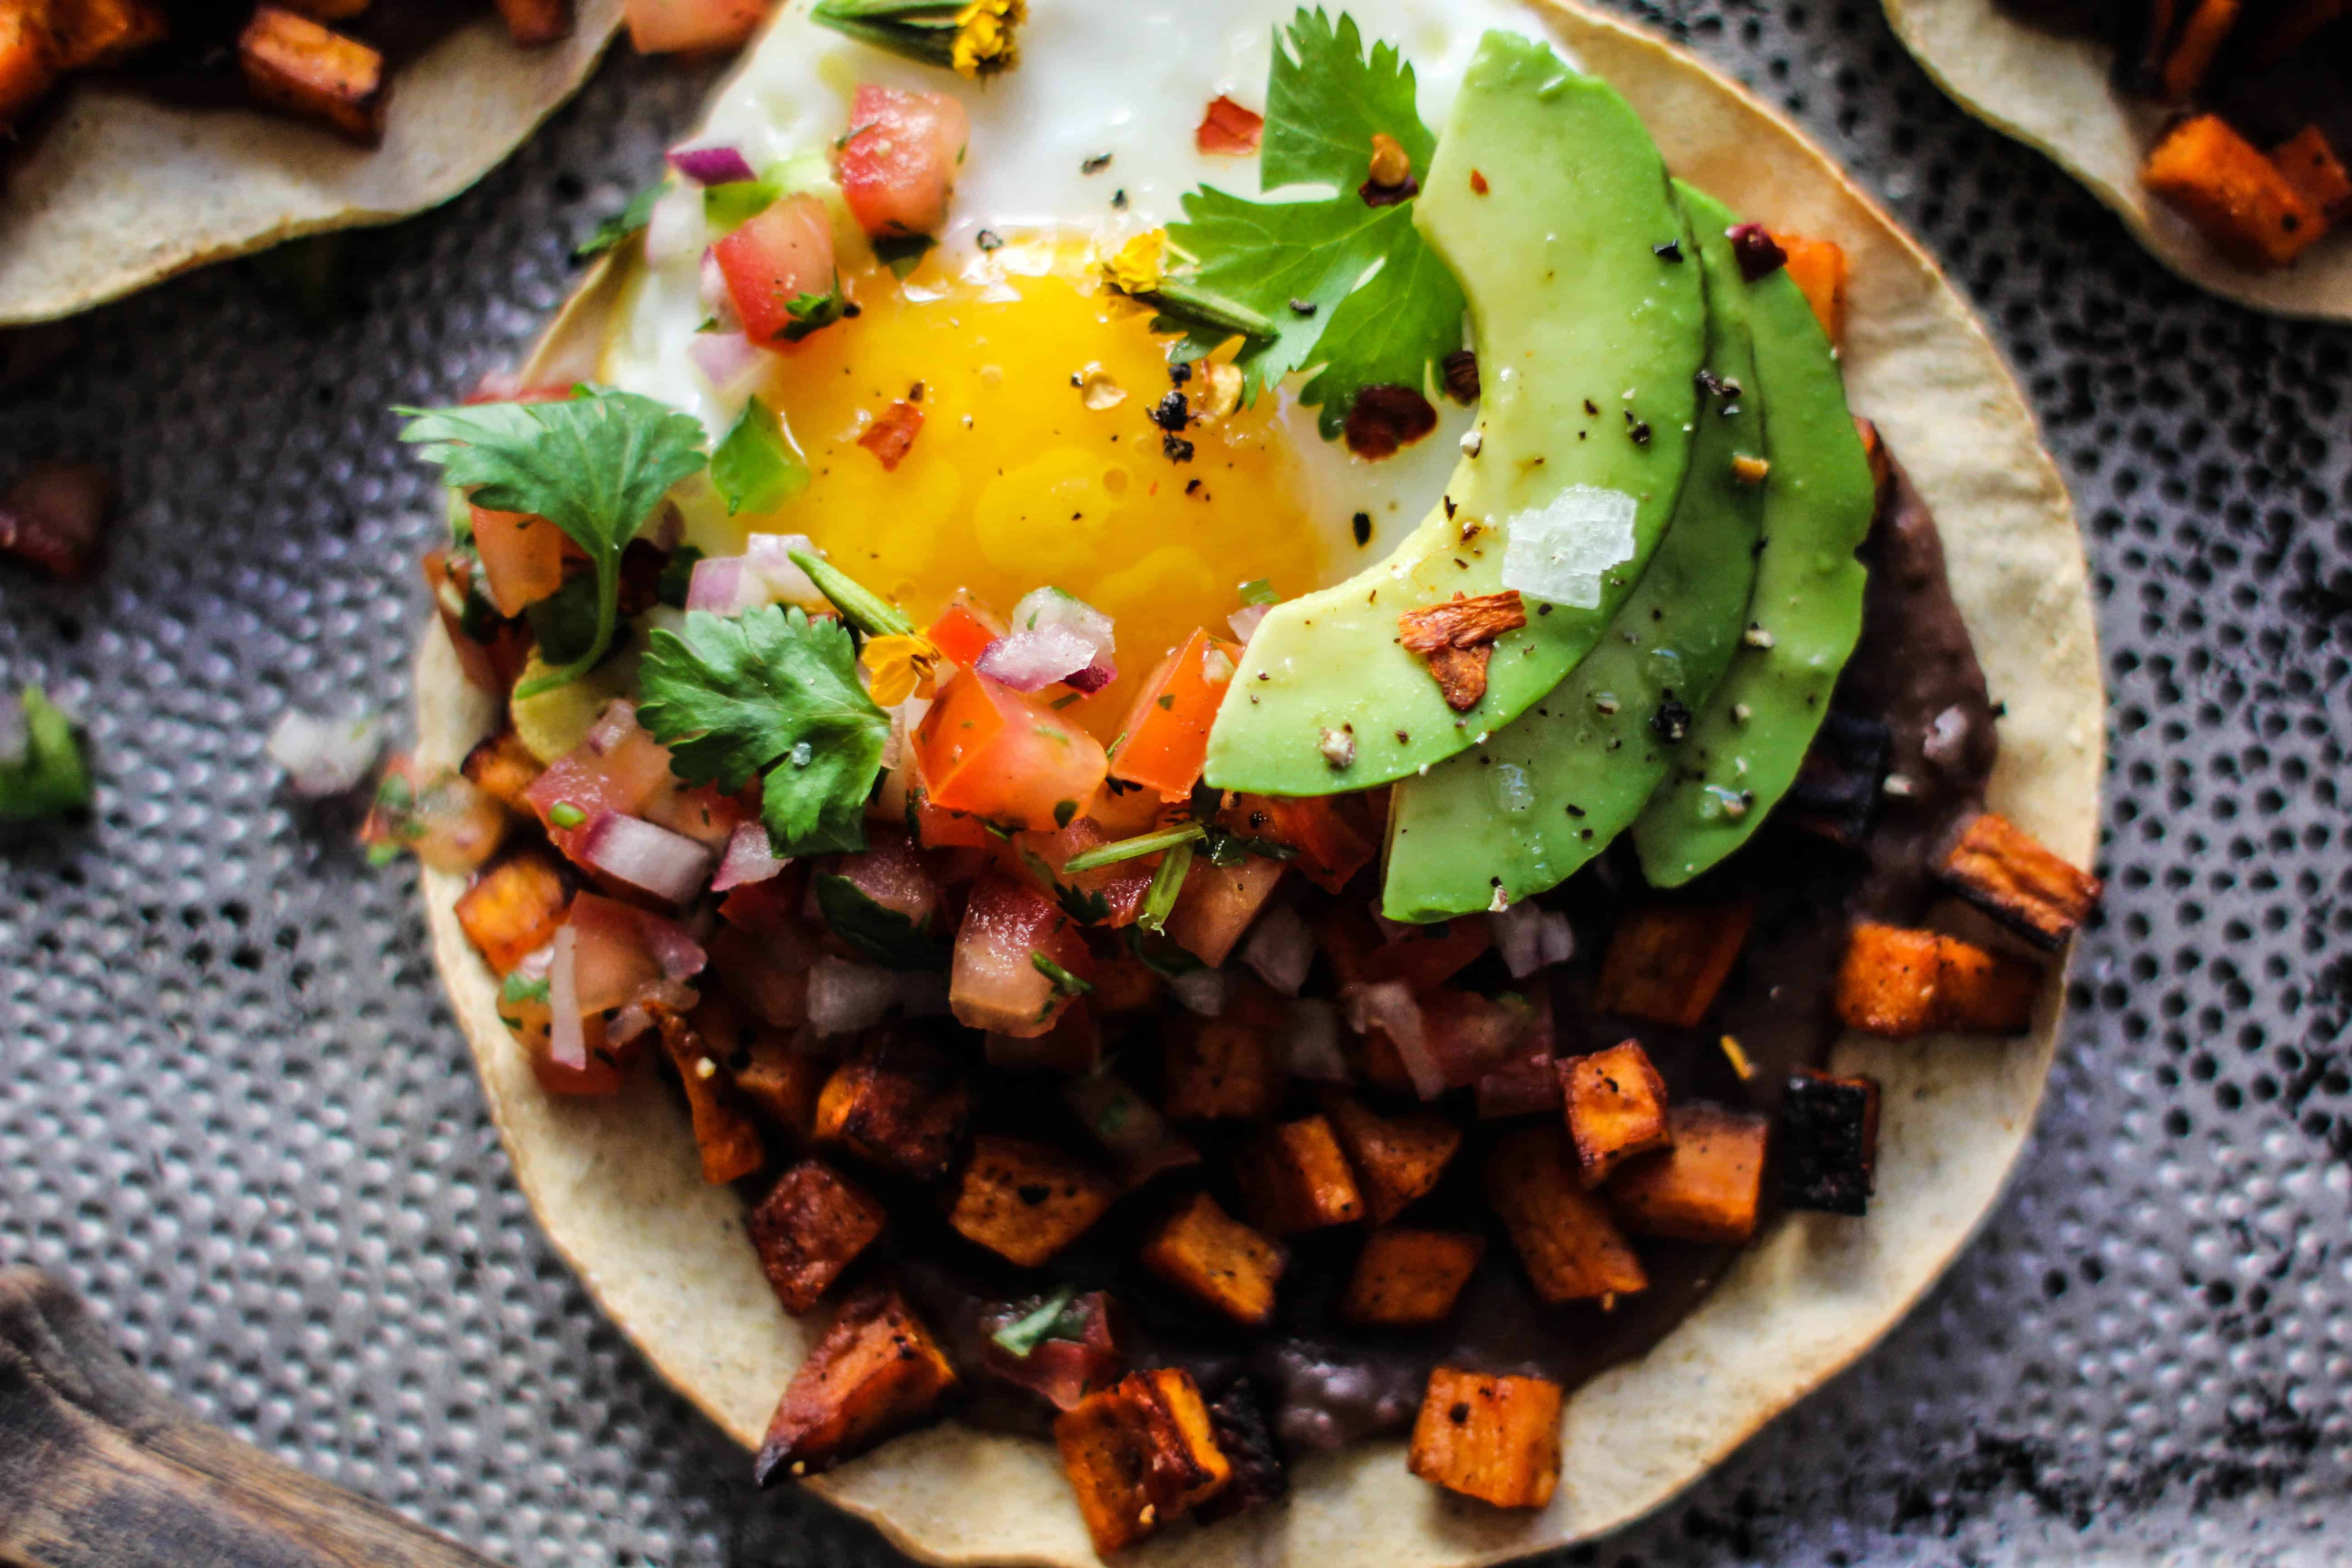 tostada with refried black beans, roasted sweet potatoes, fried egg, and avocado